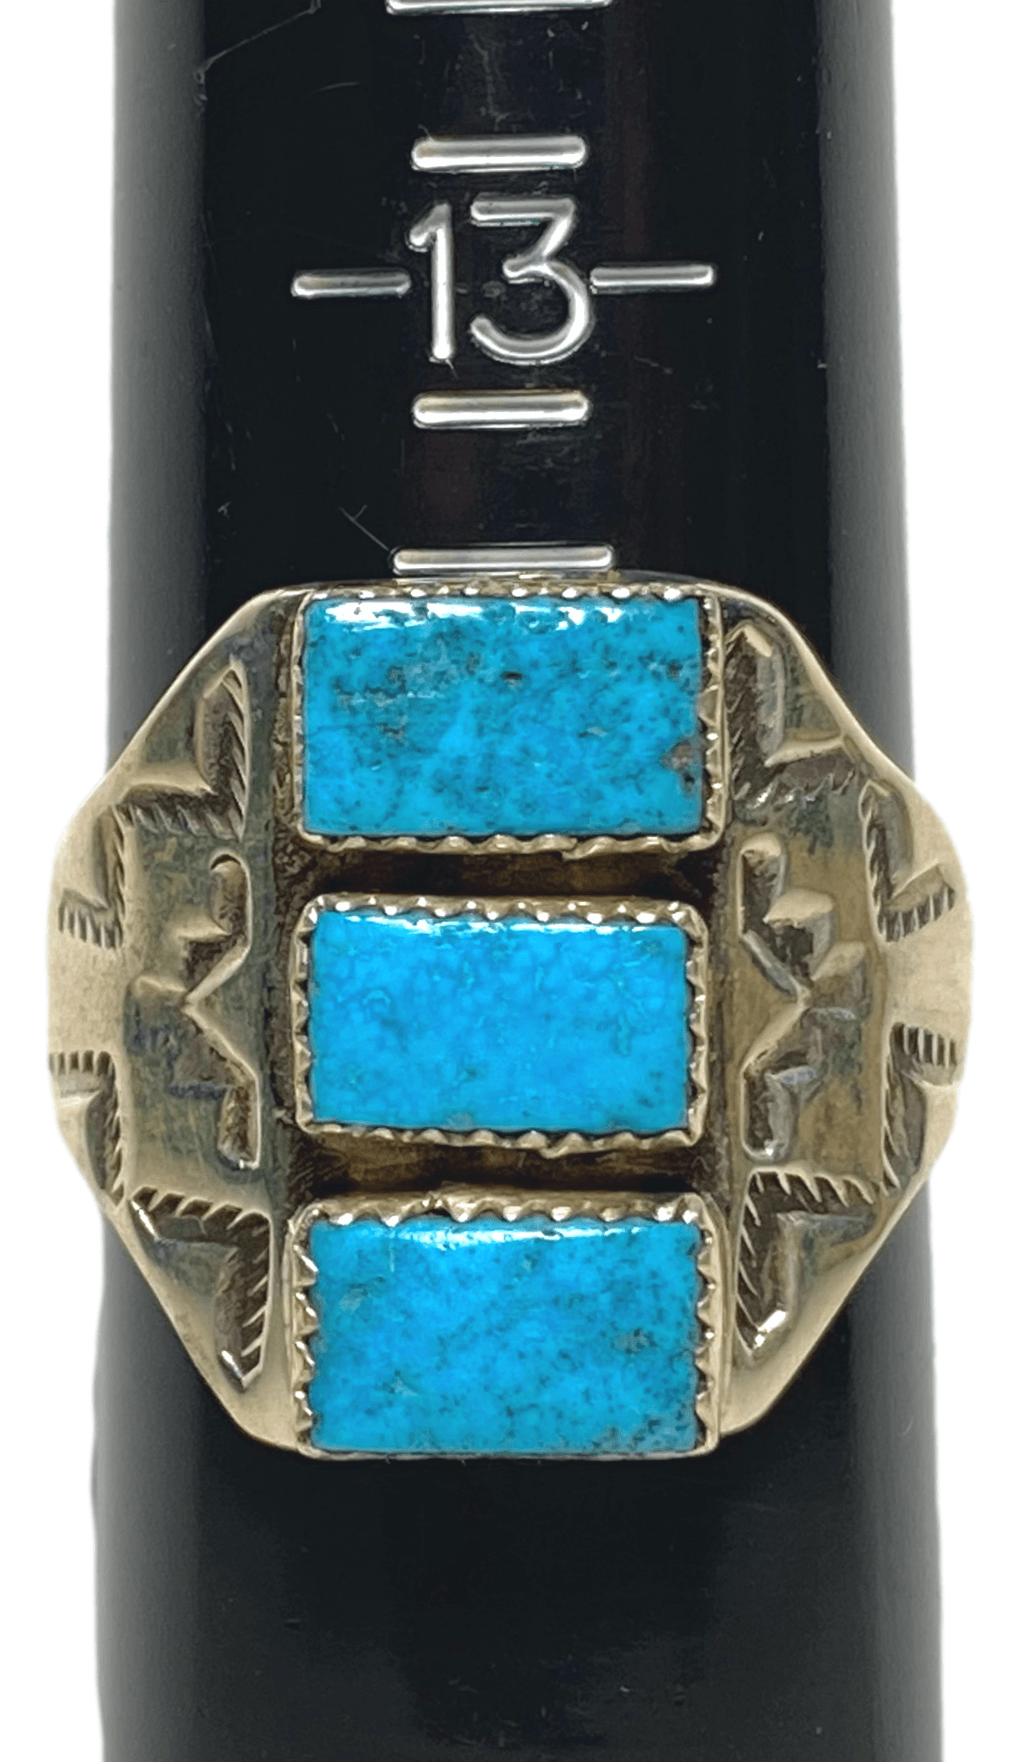 Ring Turquoise 3 Count Half Navajo Design Handcrafted by Native American Artisan 14 size 7/8 L inches - Ysleta Mission Gift Shop- VOTED El Paso's Best Gift Shop